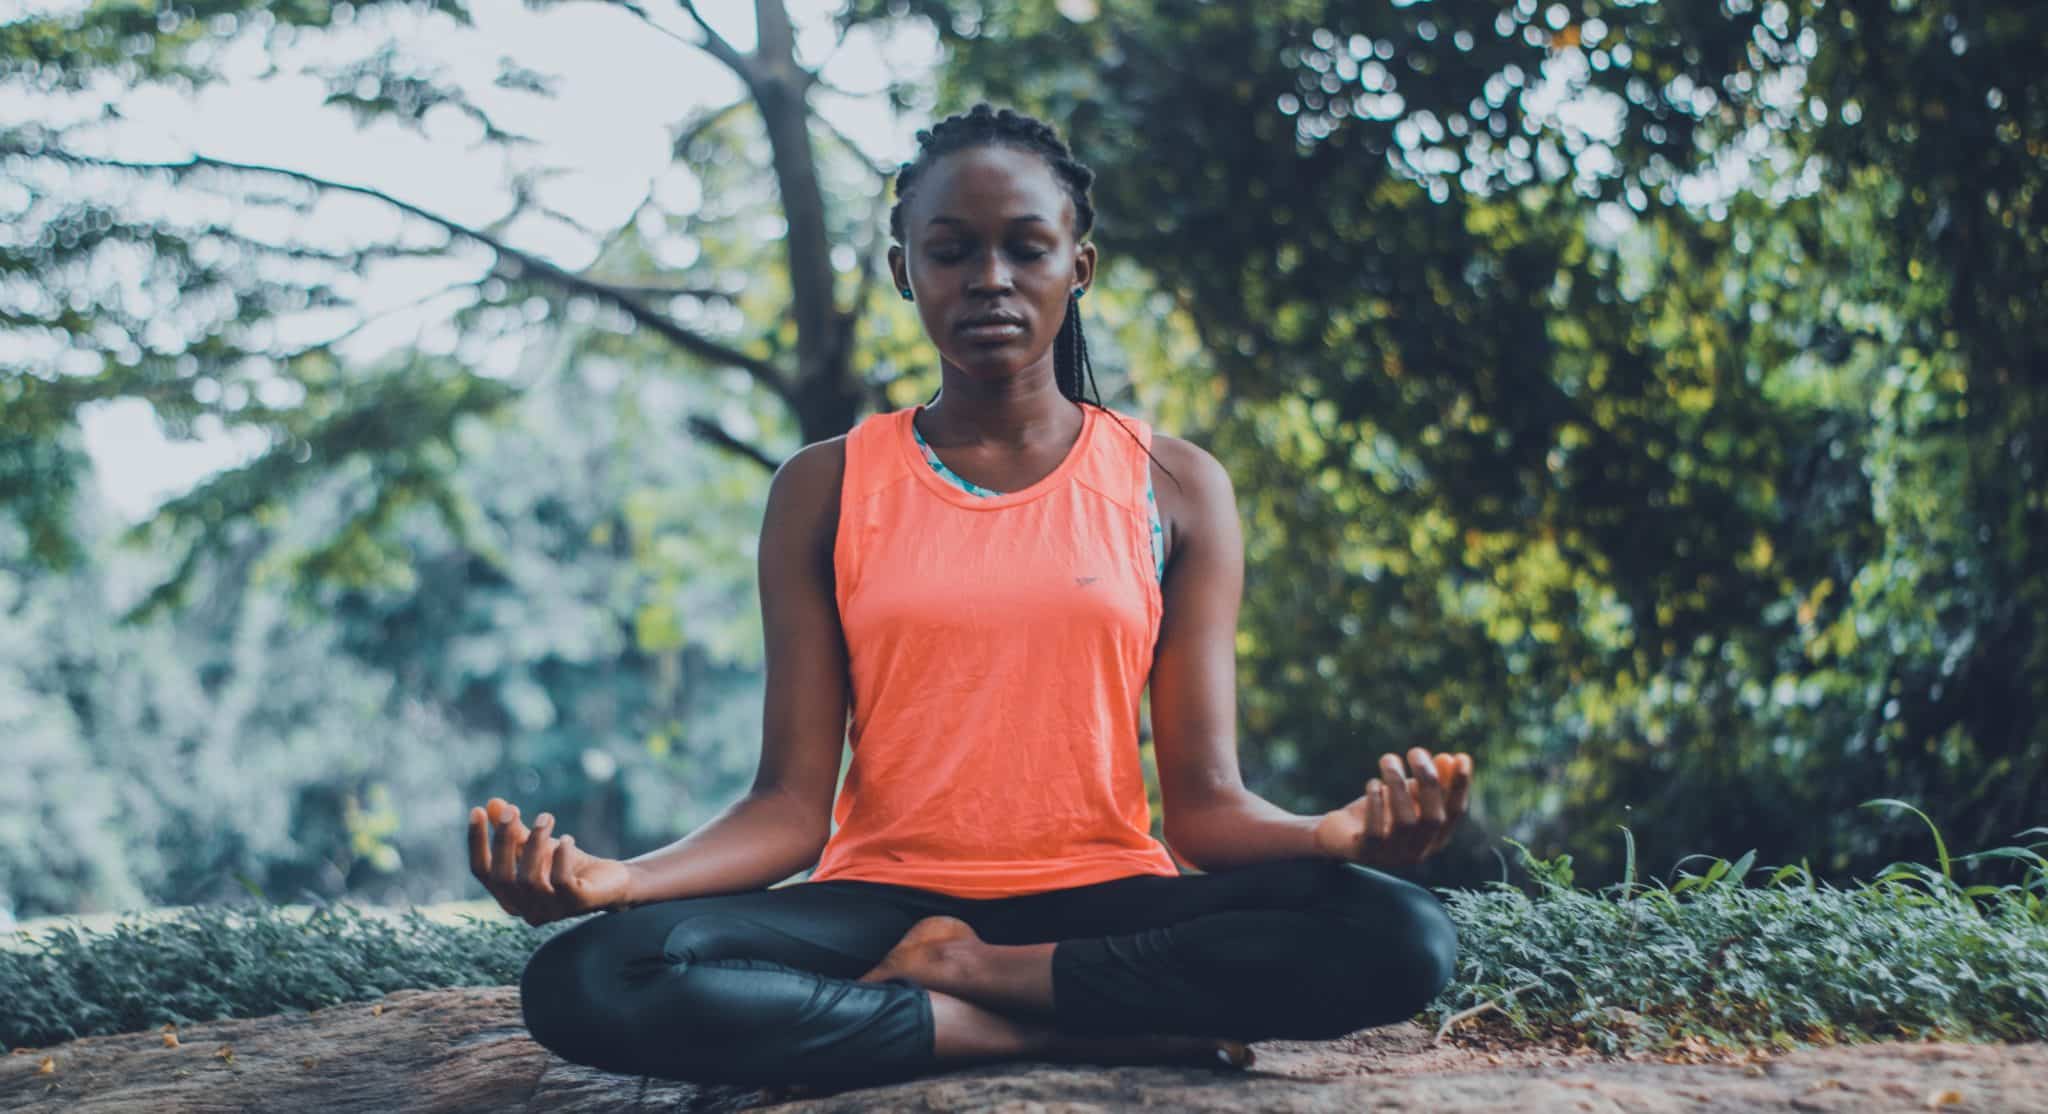 How to meditate for beginners at home